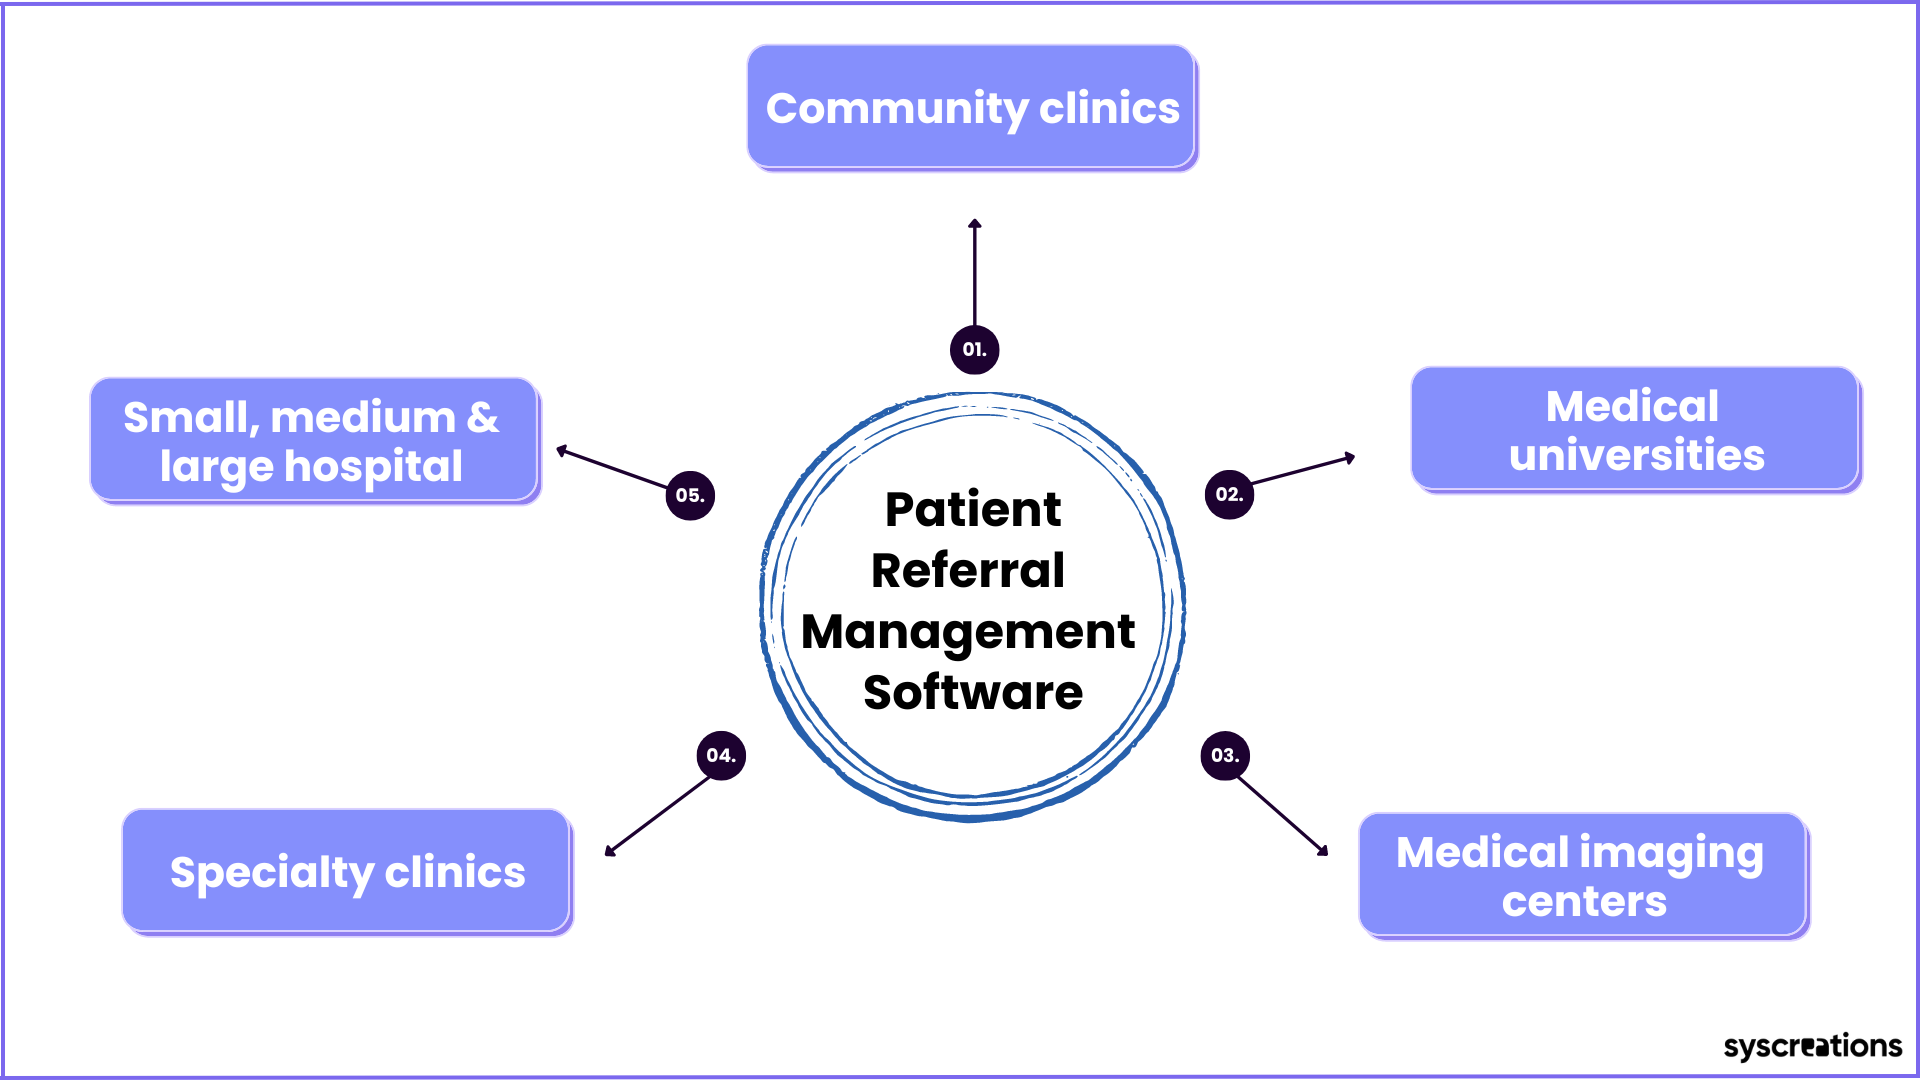 Areas where patient referral management software can be use